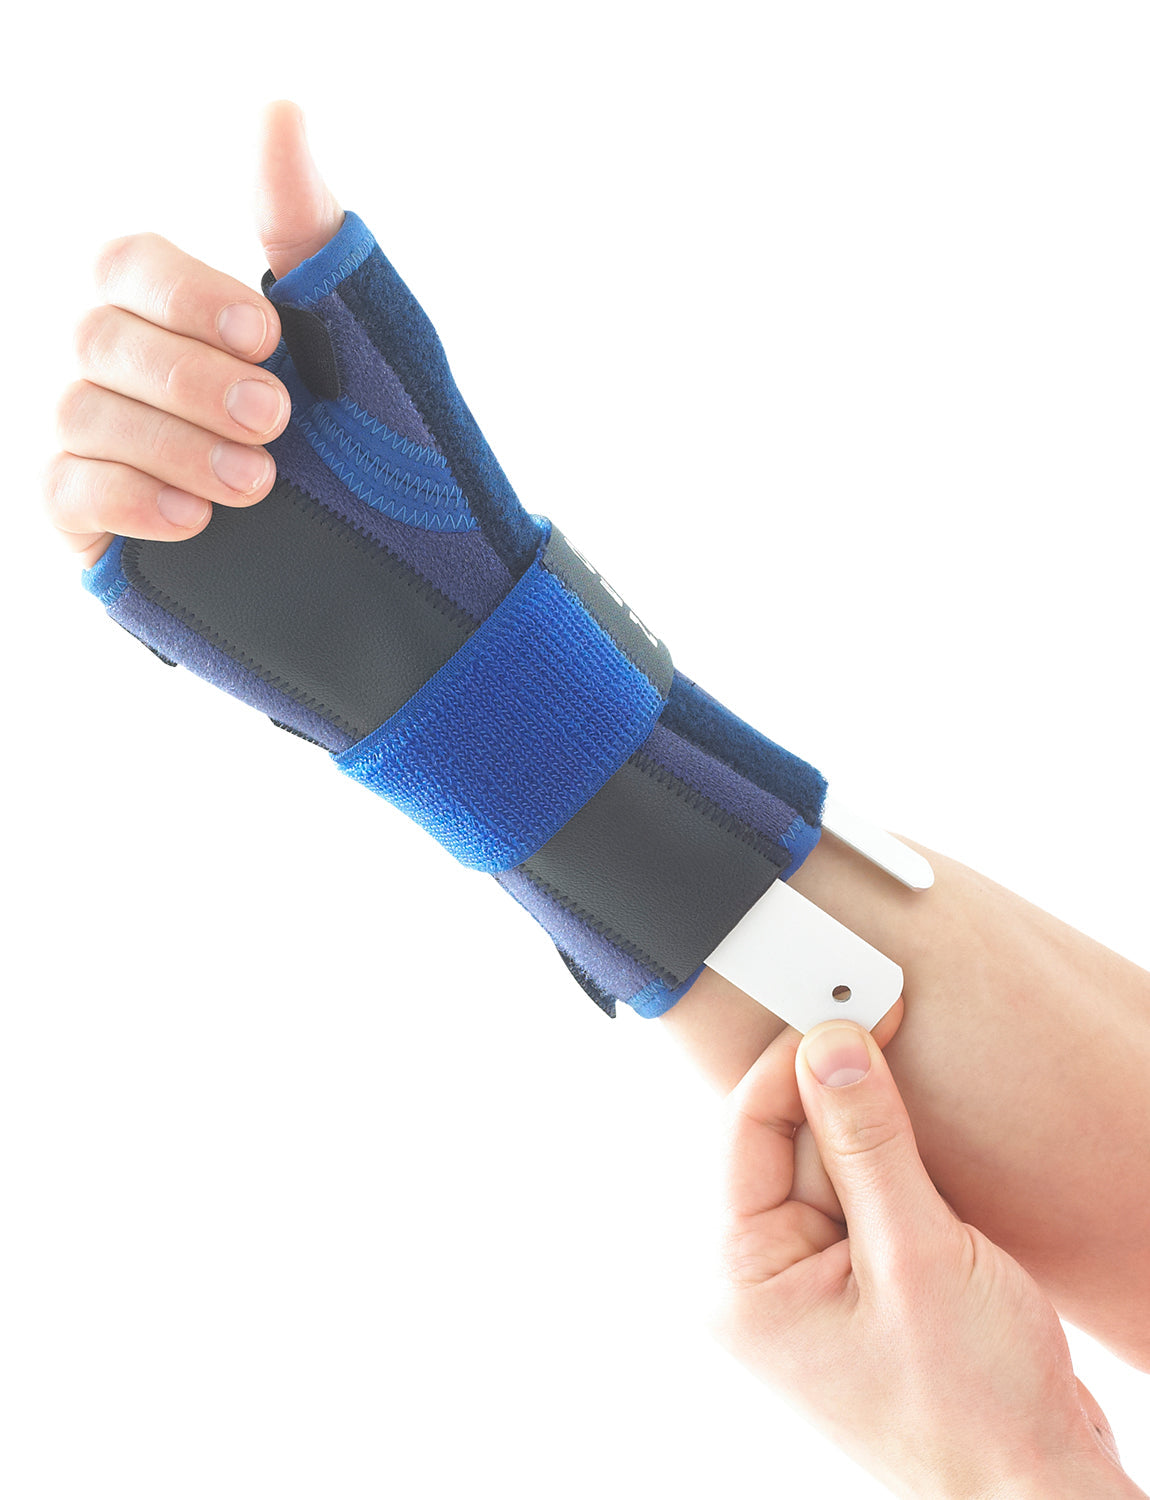 Wrist Braces in Hand and Wrist Support 